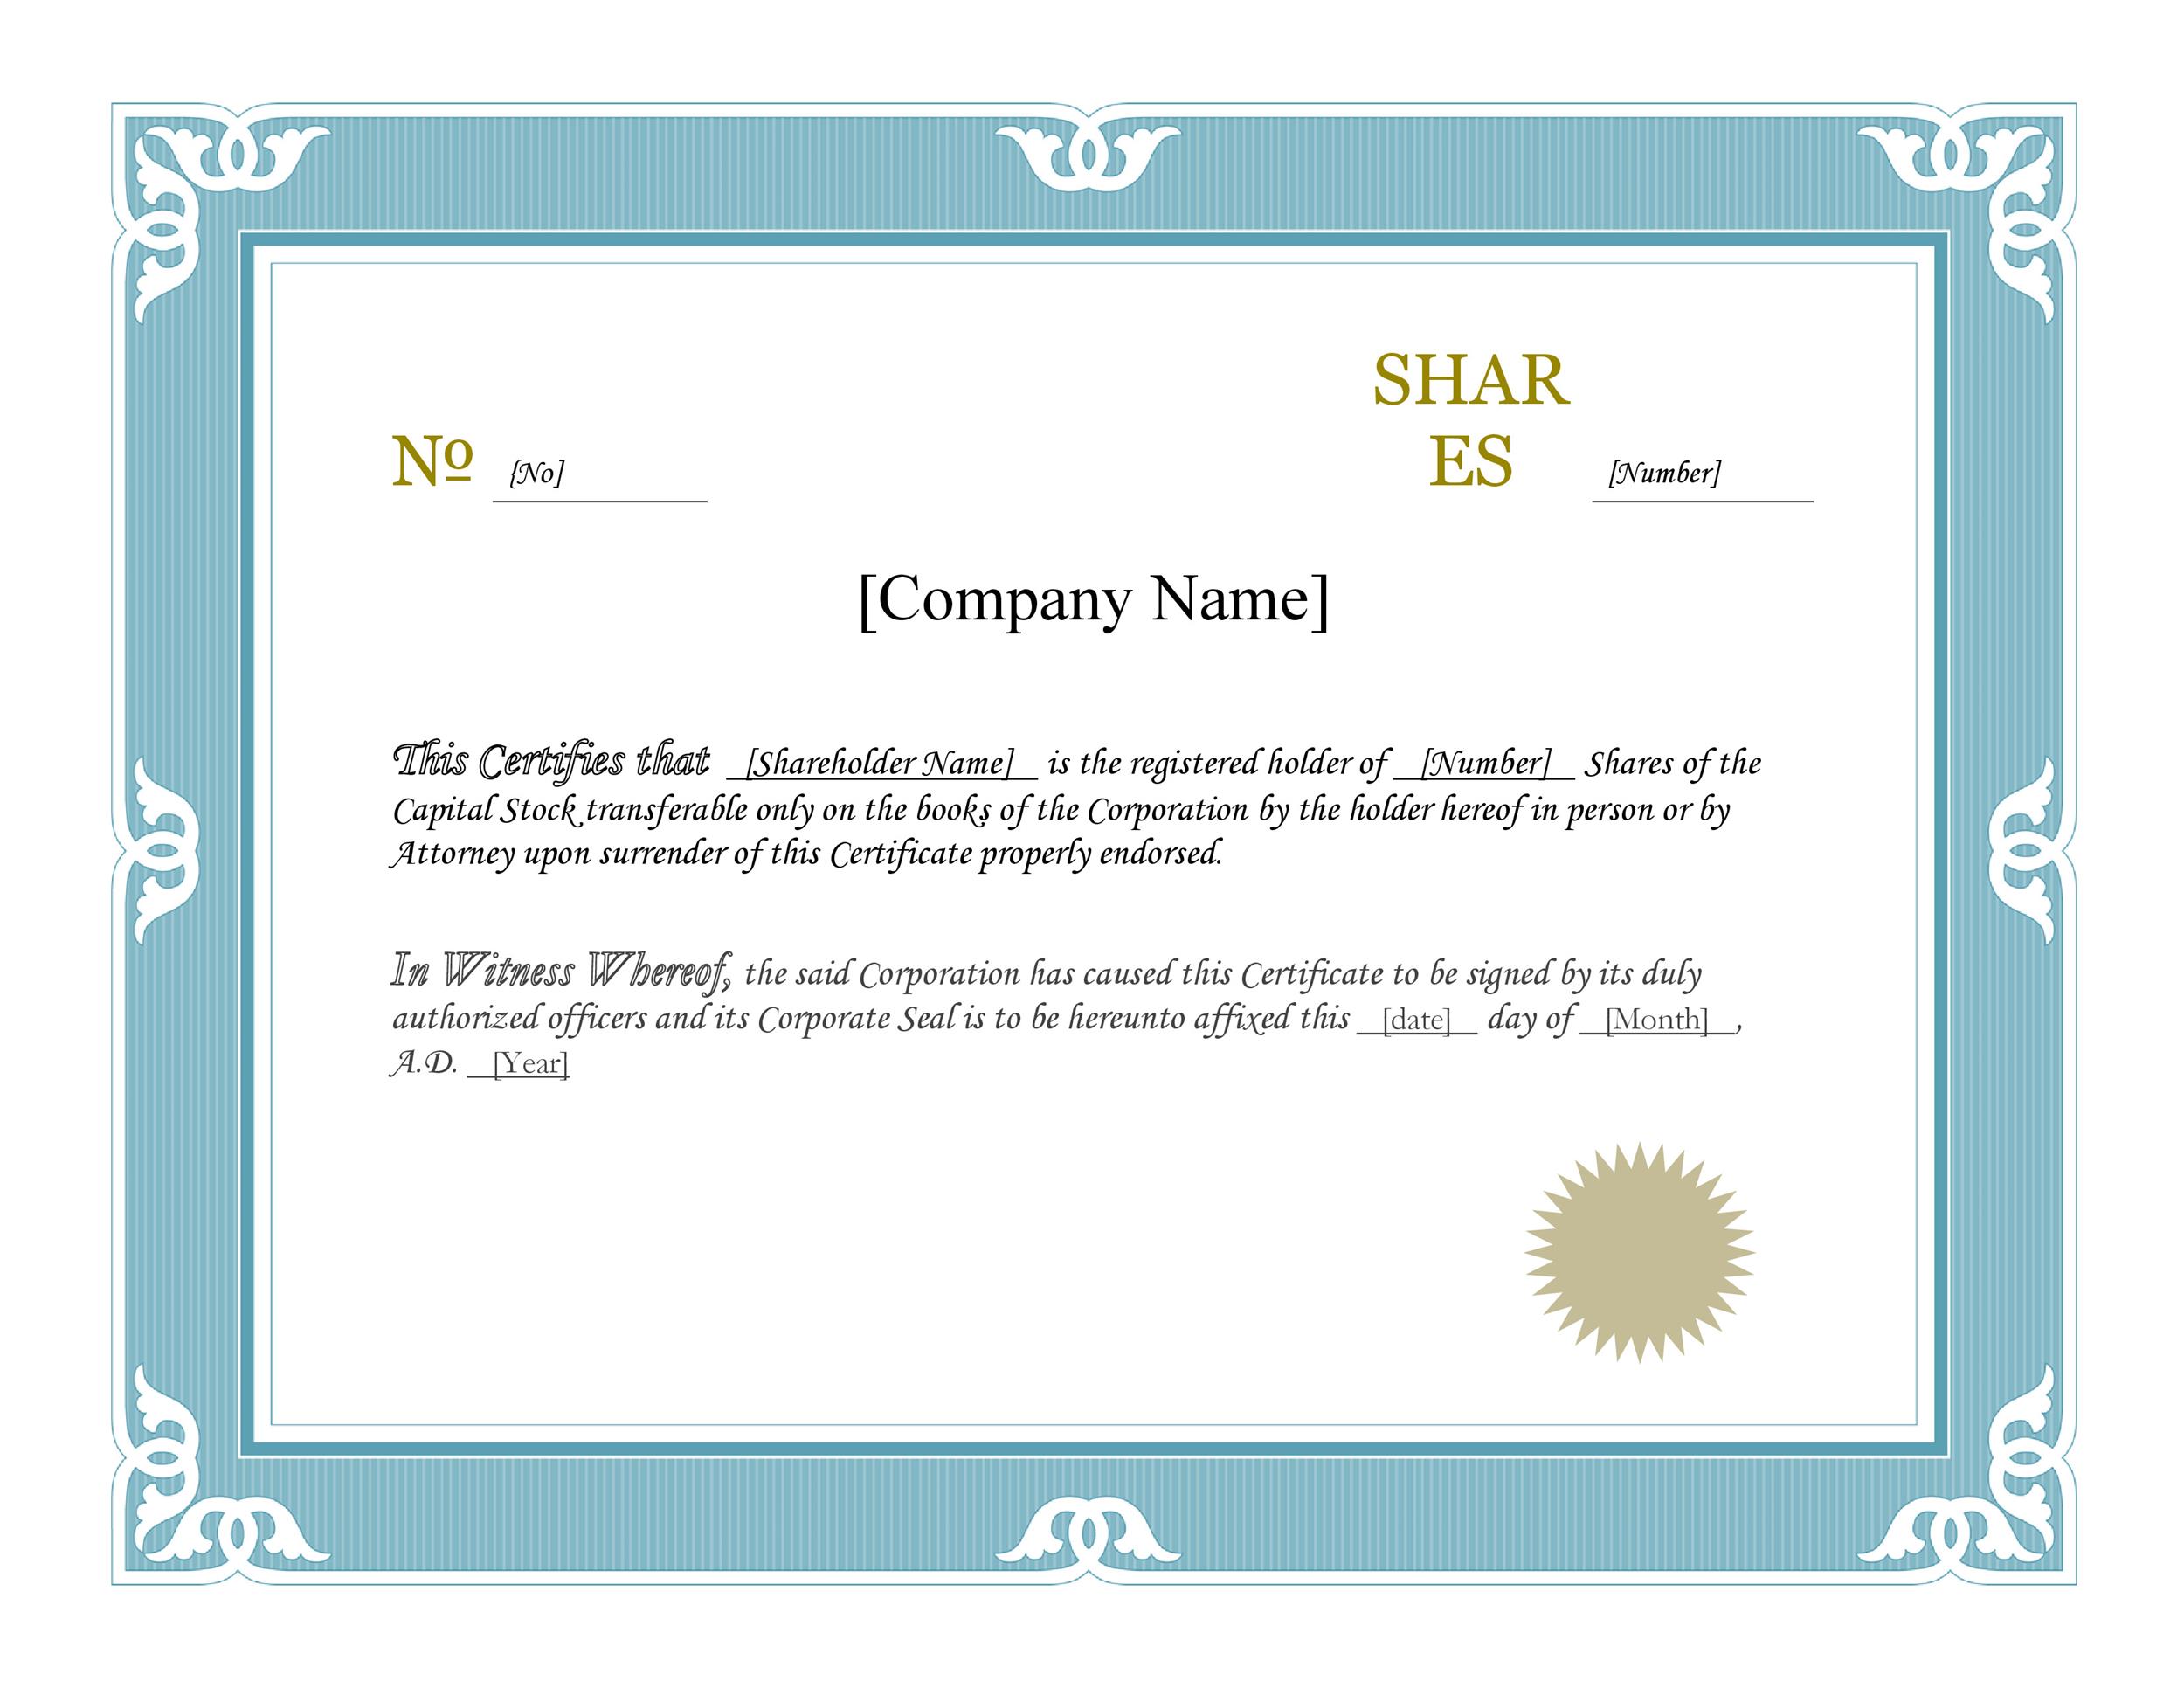 40-free-stock-certificate-templates-word-pdf-template-lab